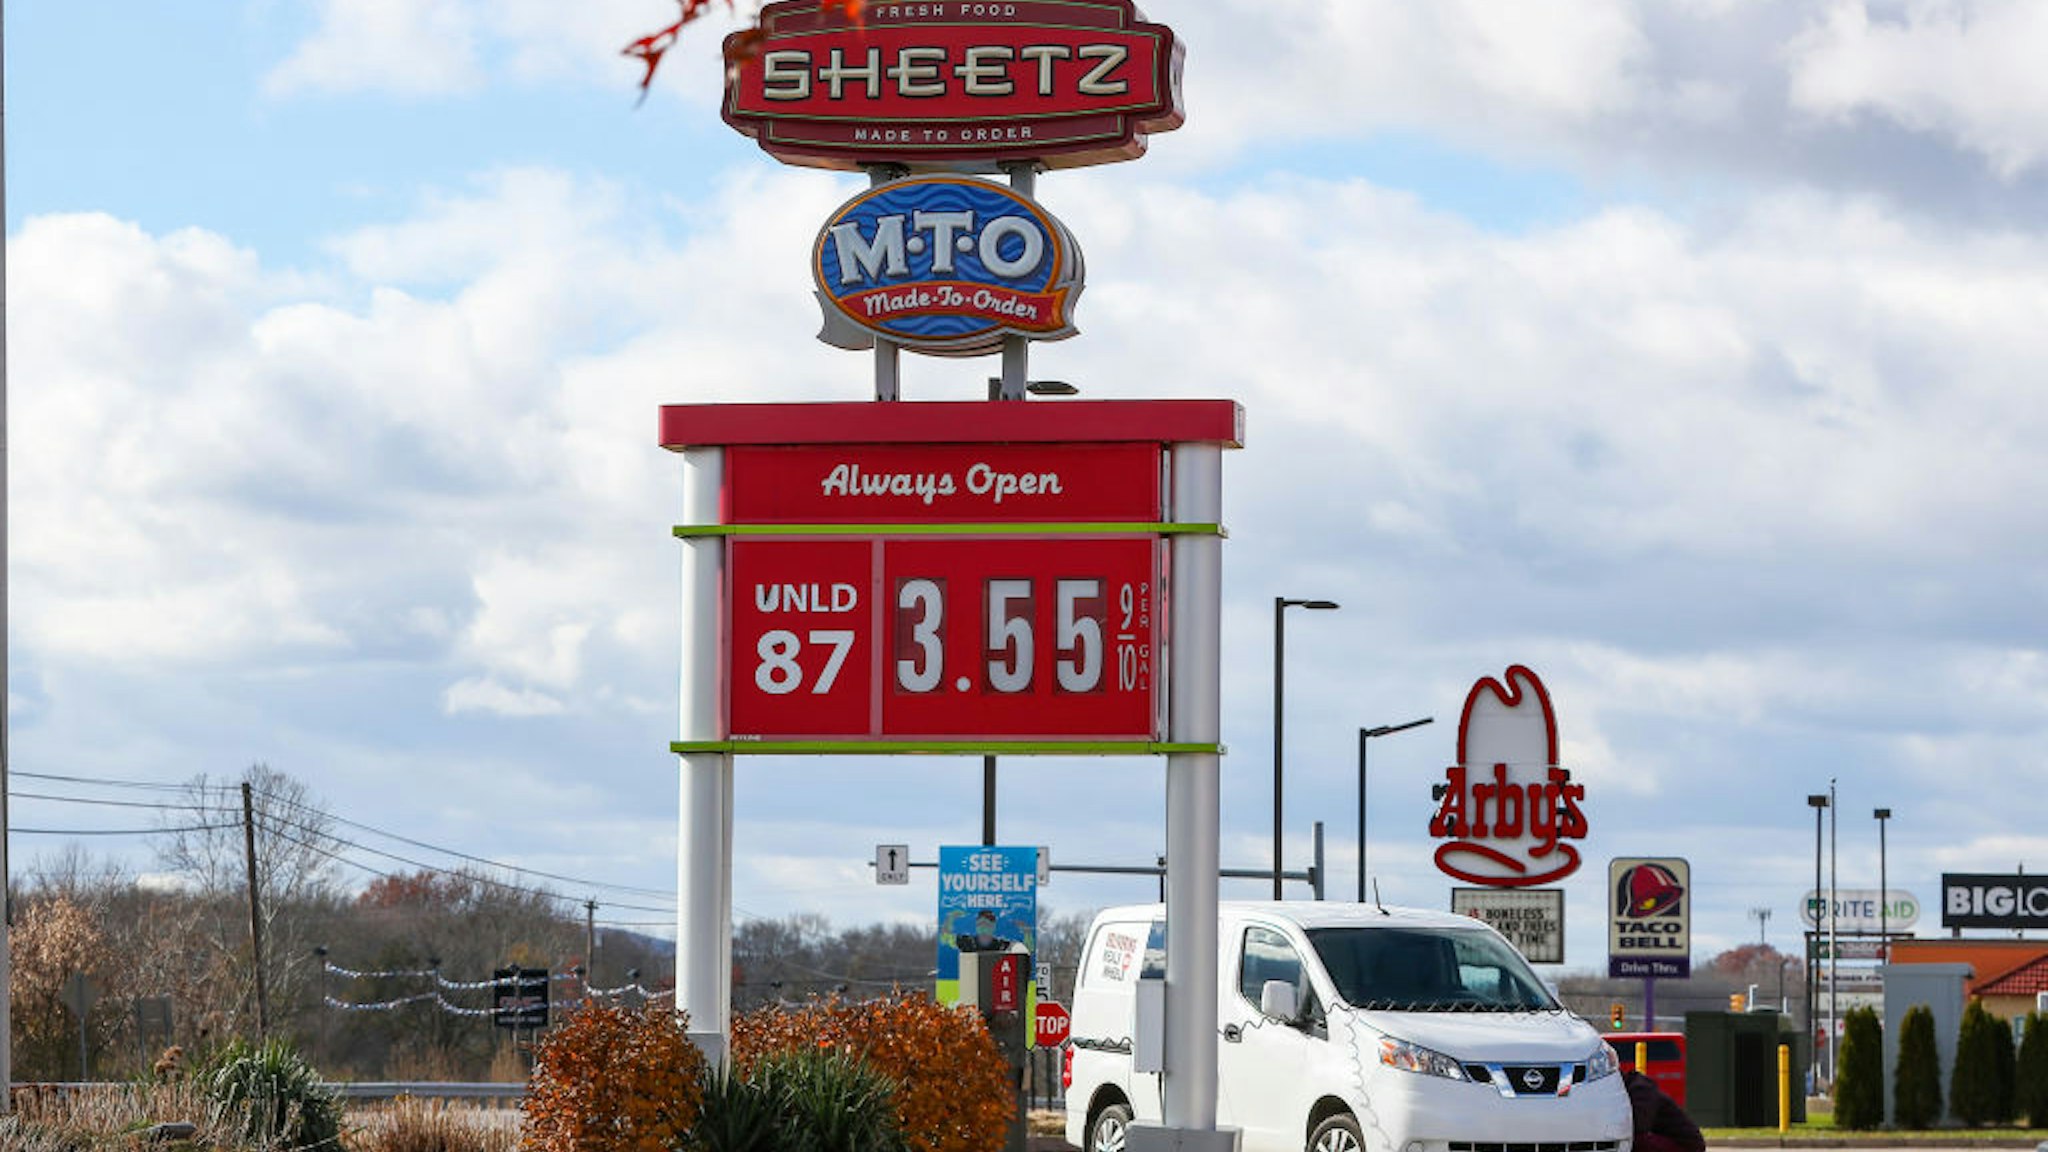 BLOOMSBURG, PENNSYLVANIA, UNITED STATES - 2021/11/23: A price stand at a Sheetz convenience store displays the price of regular unleaded gasoline. Gasoline prices in the United States remain high going into the holiday season. Gasoline prices in the United States remain high as the holiday season is approaching.